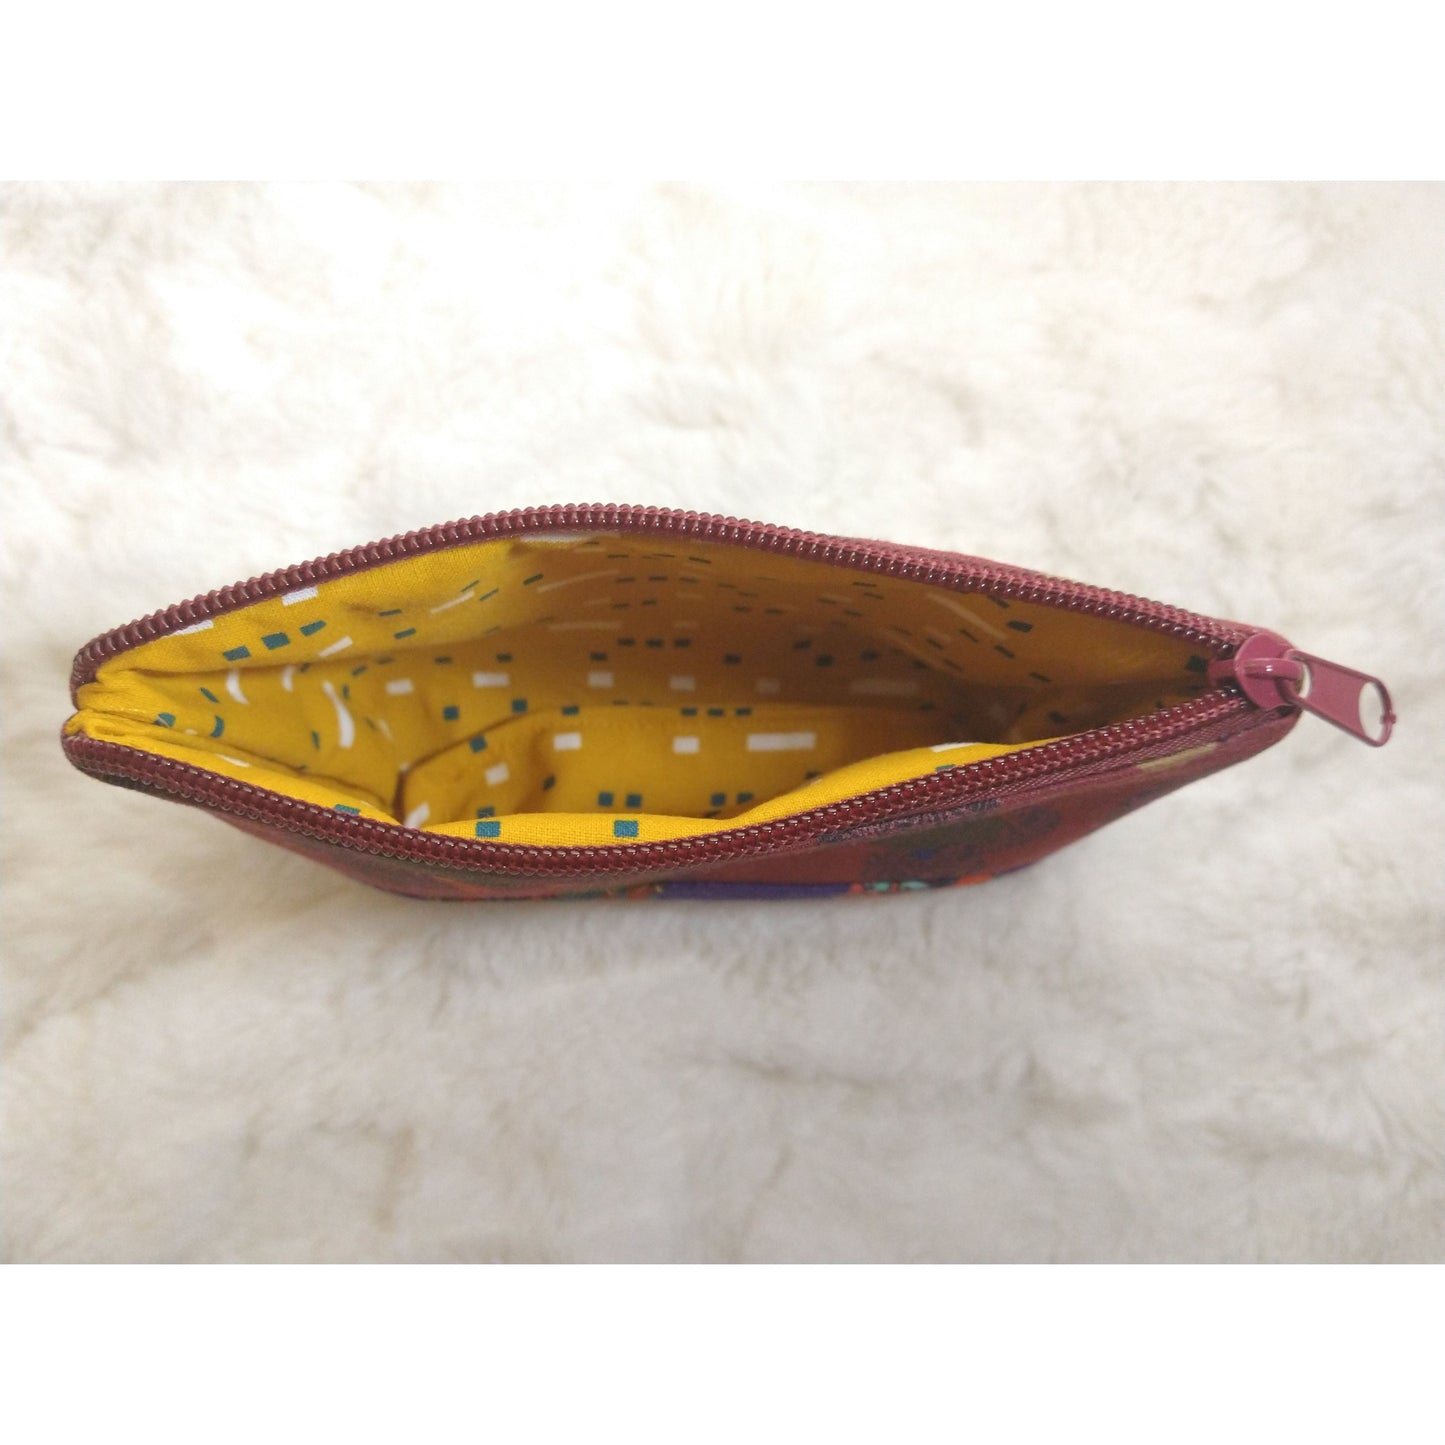 African American Small Maroon Zipper Pouch (Perfectly Imperfect)